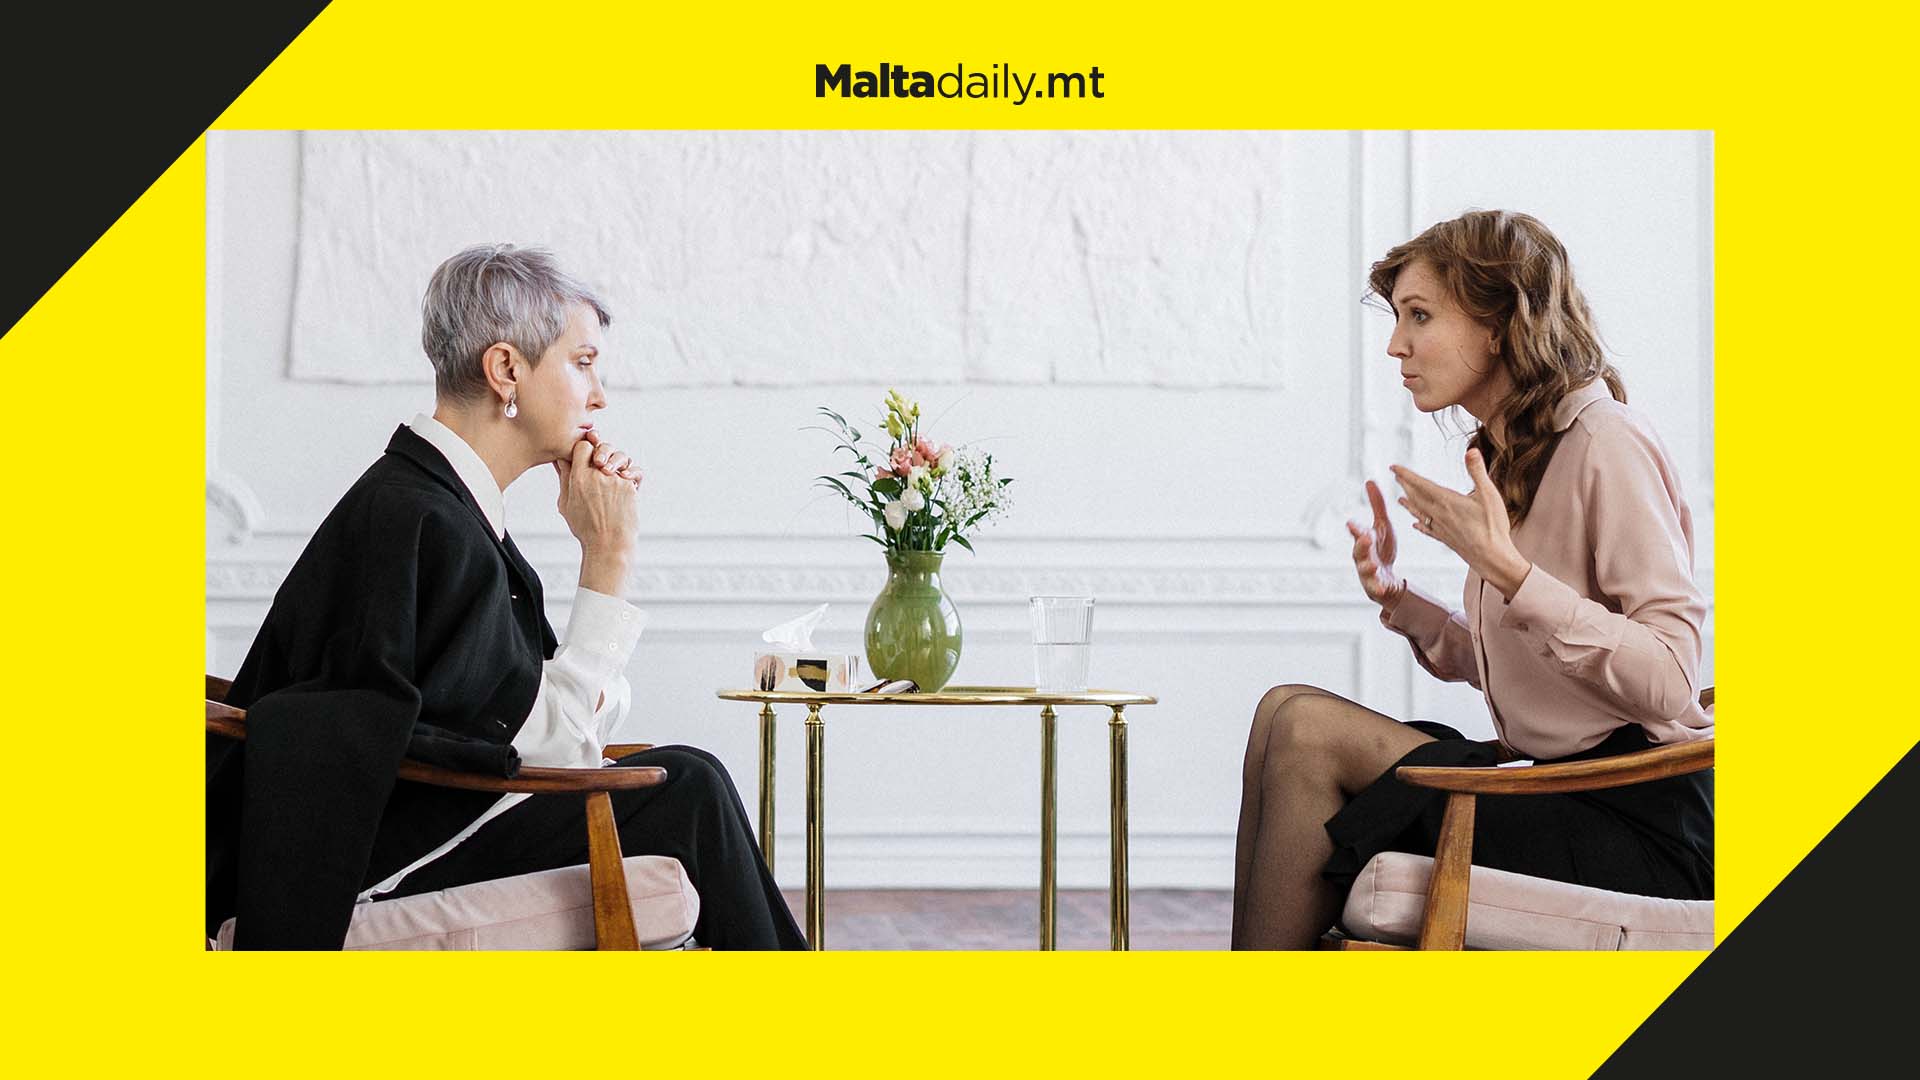 US health panel recommends routine anxiety screenings for adults - should Malta consider this?